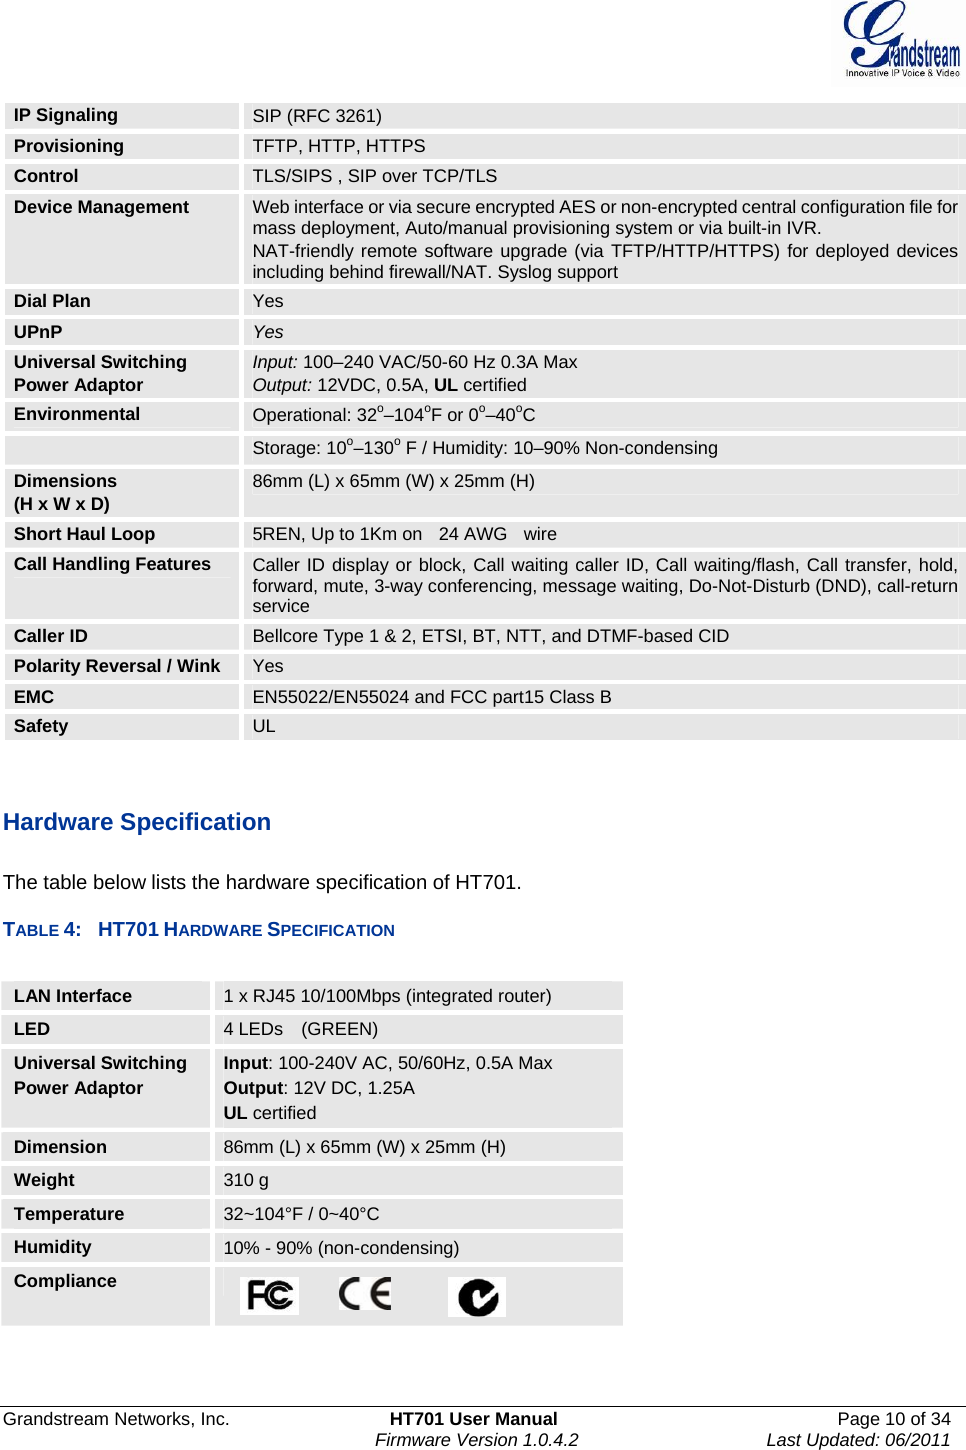  Grandstream Networks, Inc.  HT701 User Manual  Page 10 of 34     Firmware Version 1.0.4.2  Last Updated: 06/2011  IP Signaling  SIP (RFC 3261) Provisioning  TFTP, HTTP, HTTPS Control  TLS/SIPS , SIP over TCP/TLS Device Management  Web interface or via secure encrypted AES or non-encrypted central configuration file for mass deployment, Auto/manual provisioning system or via built-in IVR. NAT-friendly remote software upgrade (via TFTP/HTTP/HTTPS) for deployed devices including behind firewall/NAT. Syslog support Dial Plan  Yes UPnP  Yes Universal Switching Power Adaptor  Input: 100–240 VAC/50-60 Hz 0.3A Max  Output: 12VDC, 0.5A, UL certified Environmental  Operational: 32o–104oF or 0o–40oC  Storage: 10o–130o F / Humidity: 10–90% Non-condensing Dimensions  (H x W x D)  86mm (L) x 65mm (W) x 25mm (H) Short Haul Loop  5REN, Up to 1Km on    24 AWG    wire     Call Handling Features    Caller ID display or block, Call waiting caller ID, Call waiting/flash, Call transfer, hold, forward, mute, 3-way conferencing, message waiting, Do-Not-Disturb (DND), call-return service Caller ID  Bellcore Type 1 &amp; 2, ETSI, BT, NTT, and DTMF-based CID Polarity Reversal / Wink  Yes EMC  EN55022/EN55024 and FCC part15 Class B Safety  UL   Hardware Specification   The table below lists the hardware specification of HT701.    TABLE 4:  HT701 HARDWARE SPECIFICATION  LAN Interface  1 x RJ45 10/100Mbps (integrated router) LED  4 LEDs    (GREEN) Universal Switching Power Adaptor Input: 100-240V AC, 50/60Hz, 0.5A Max Output: 12V DC, 1.25A UL certified   Dimension  86mm (L) x 65mm (W) x 25mm (H) Weight  310 g   Temperature  32~104°F / 0~40°C Humidity  10% - 90% (non-condensing) Compliance                  